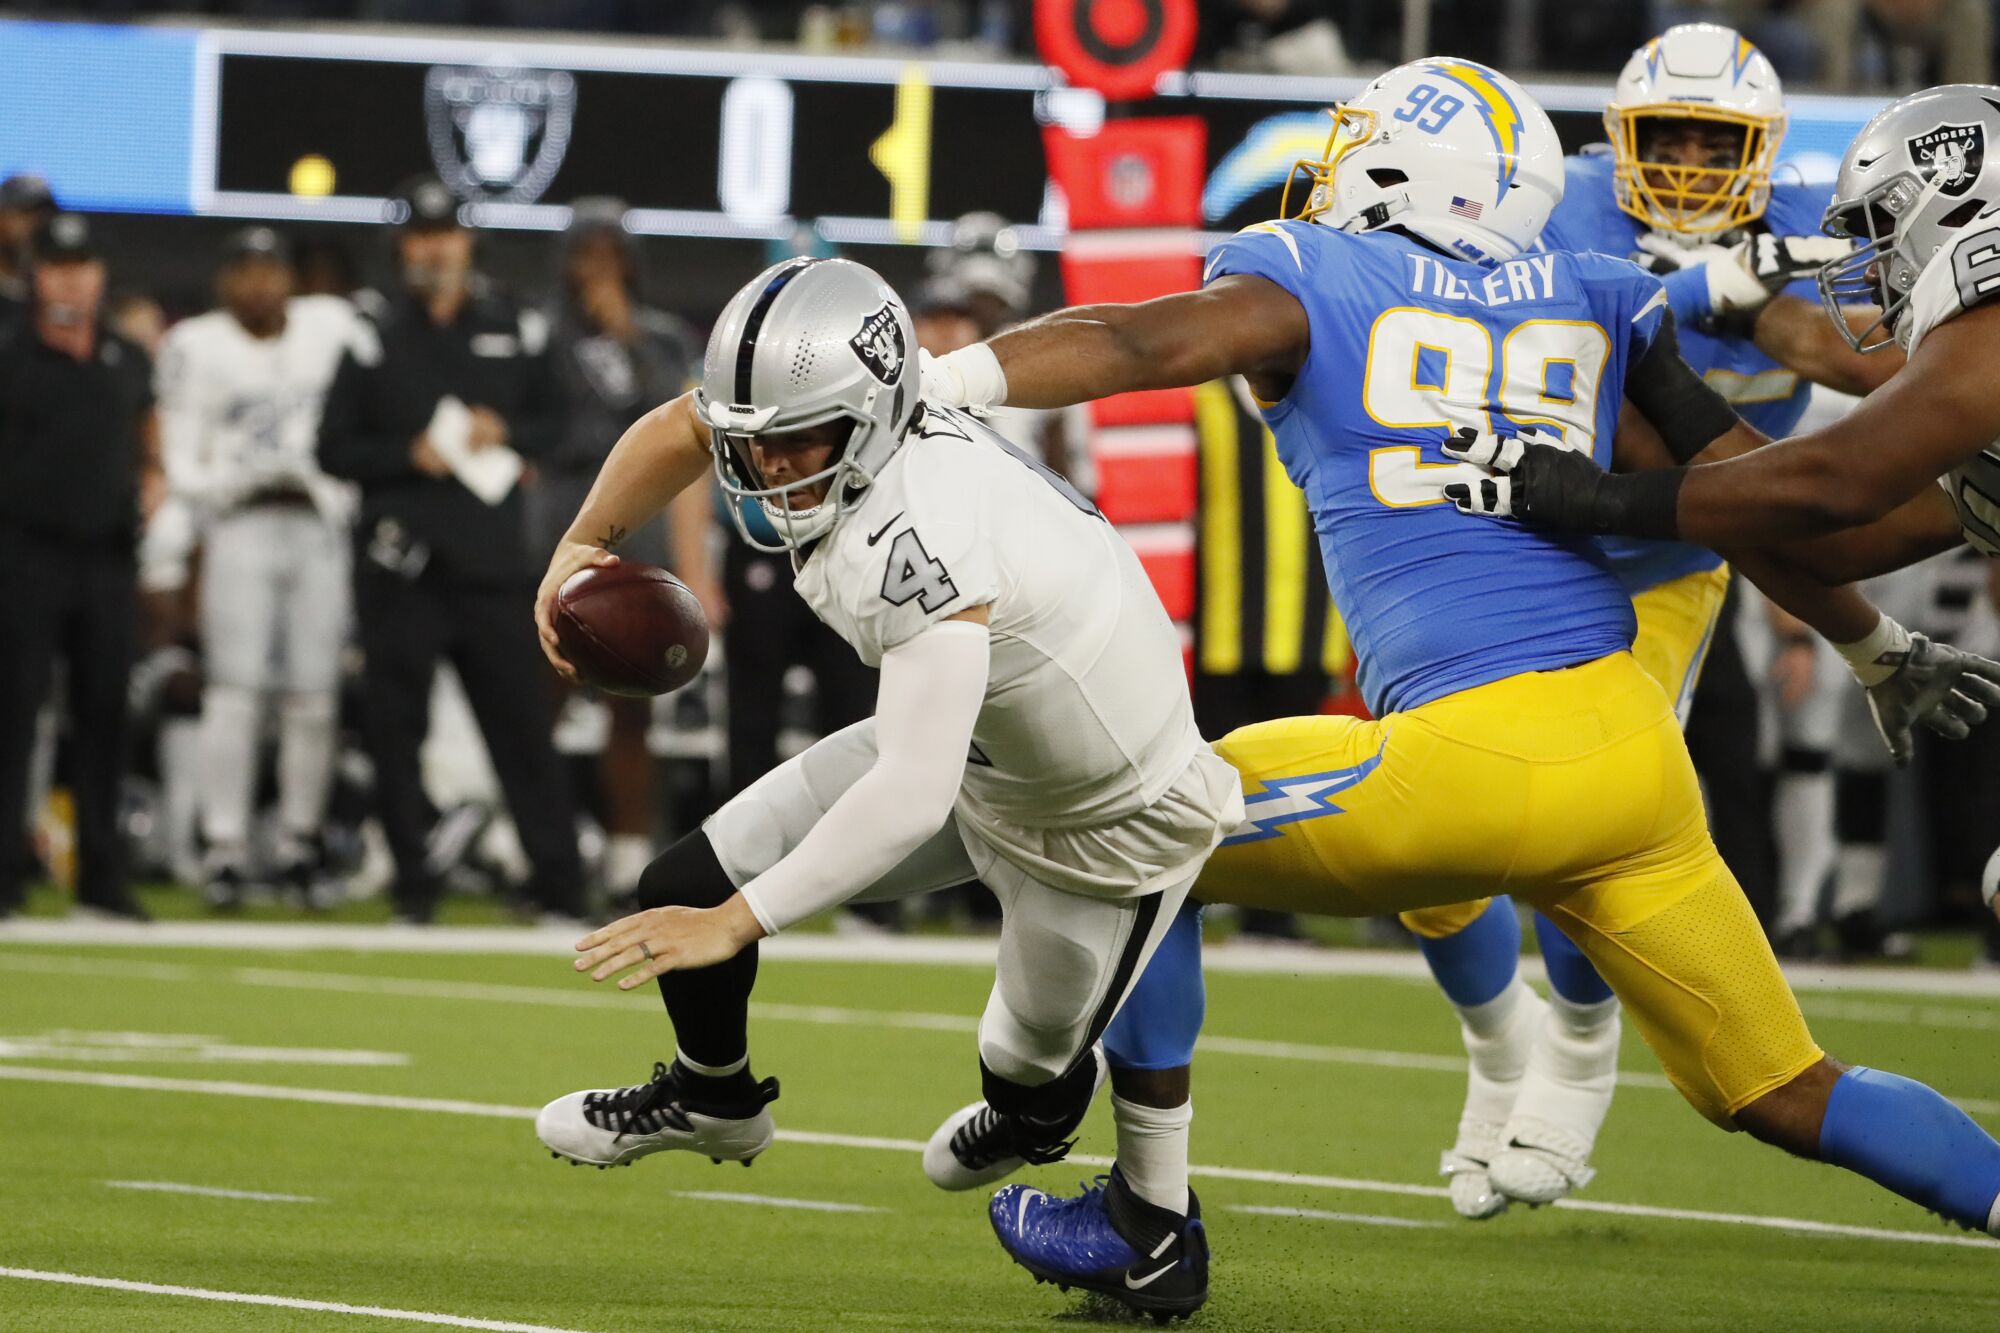 Chargers defensive tackle Jerry Tillery sacks Raiders quarterback Derek Carr during the first half.